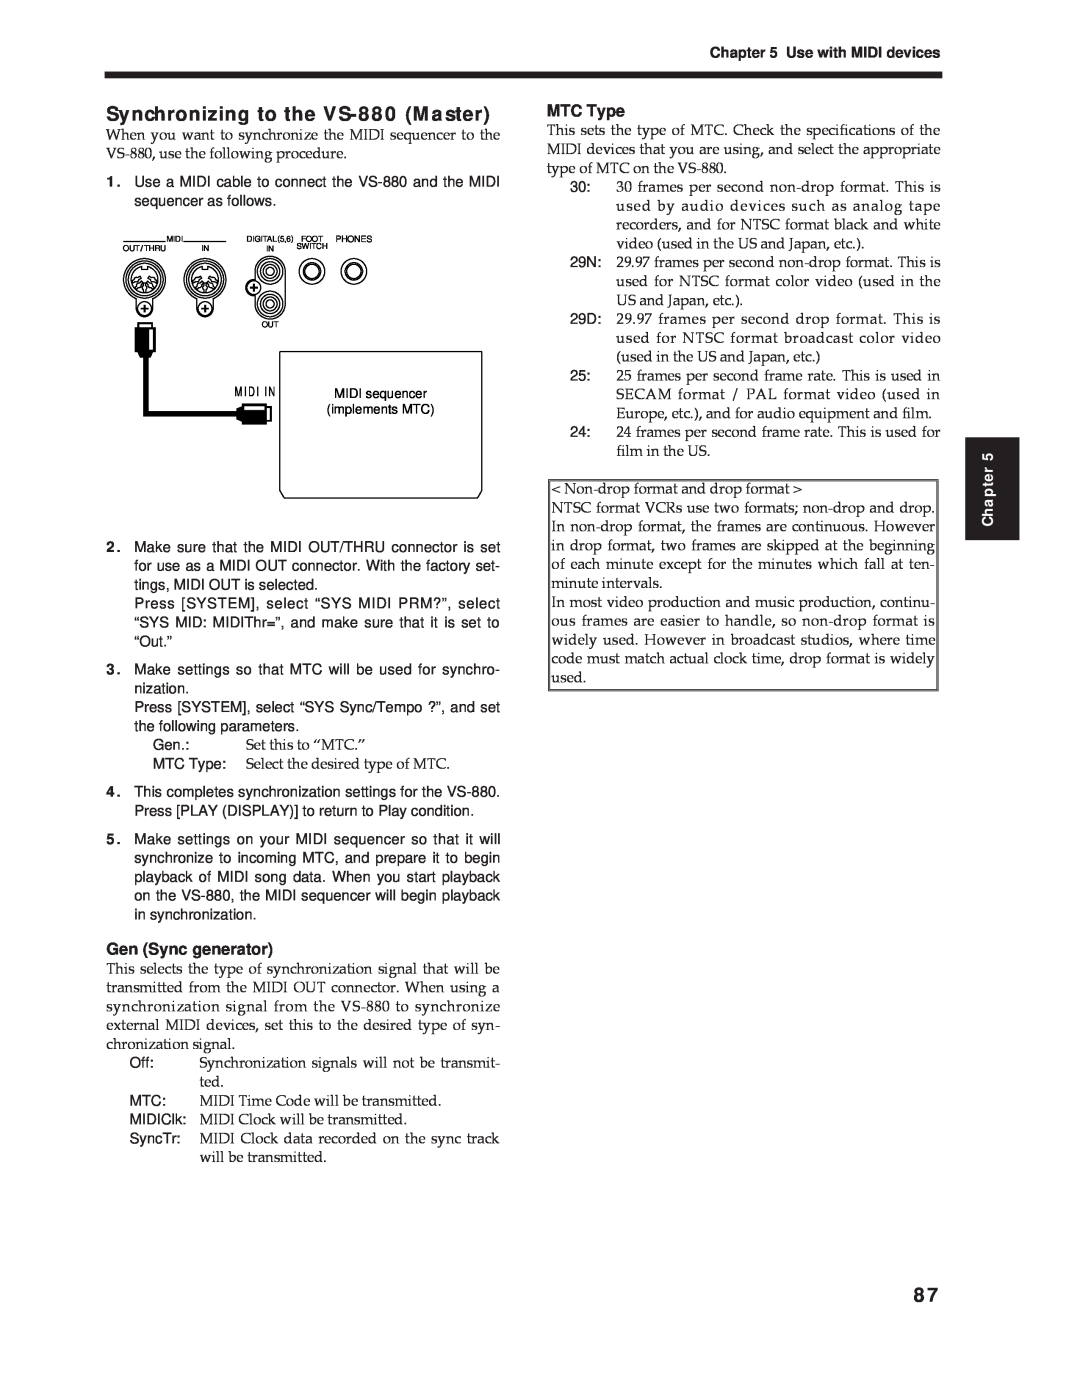 Roland Vs-880 important safety instructions Synchronizing to the VS-880 Master, Gen Sync generator, MTC Type, Chapter 